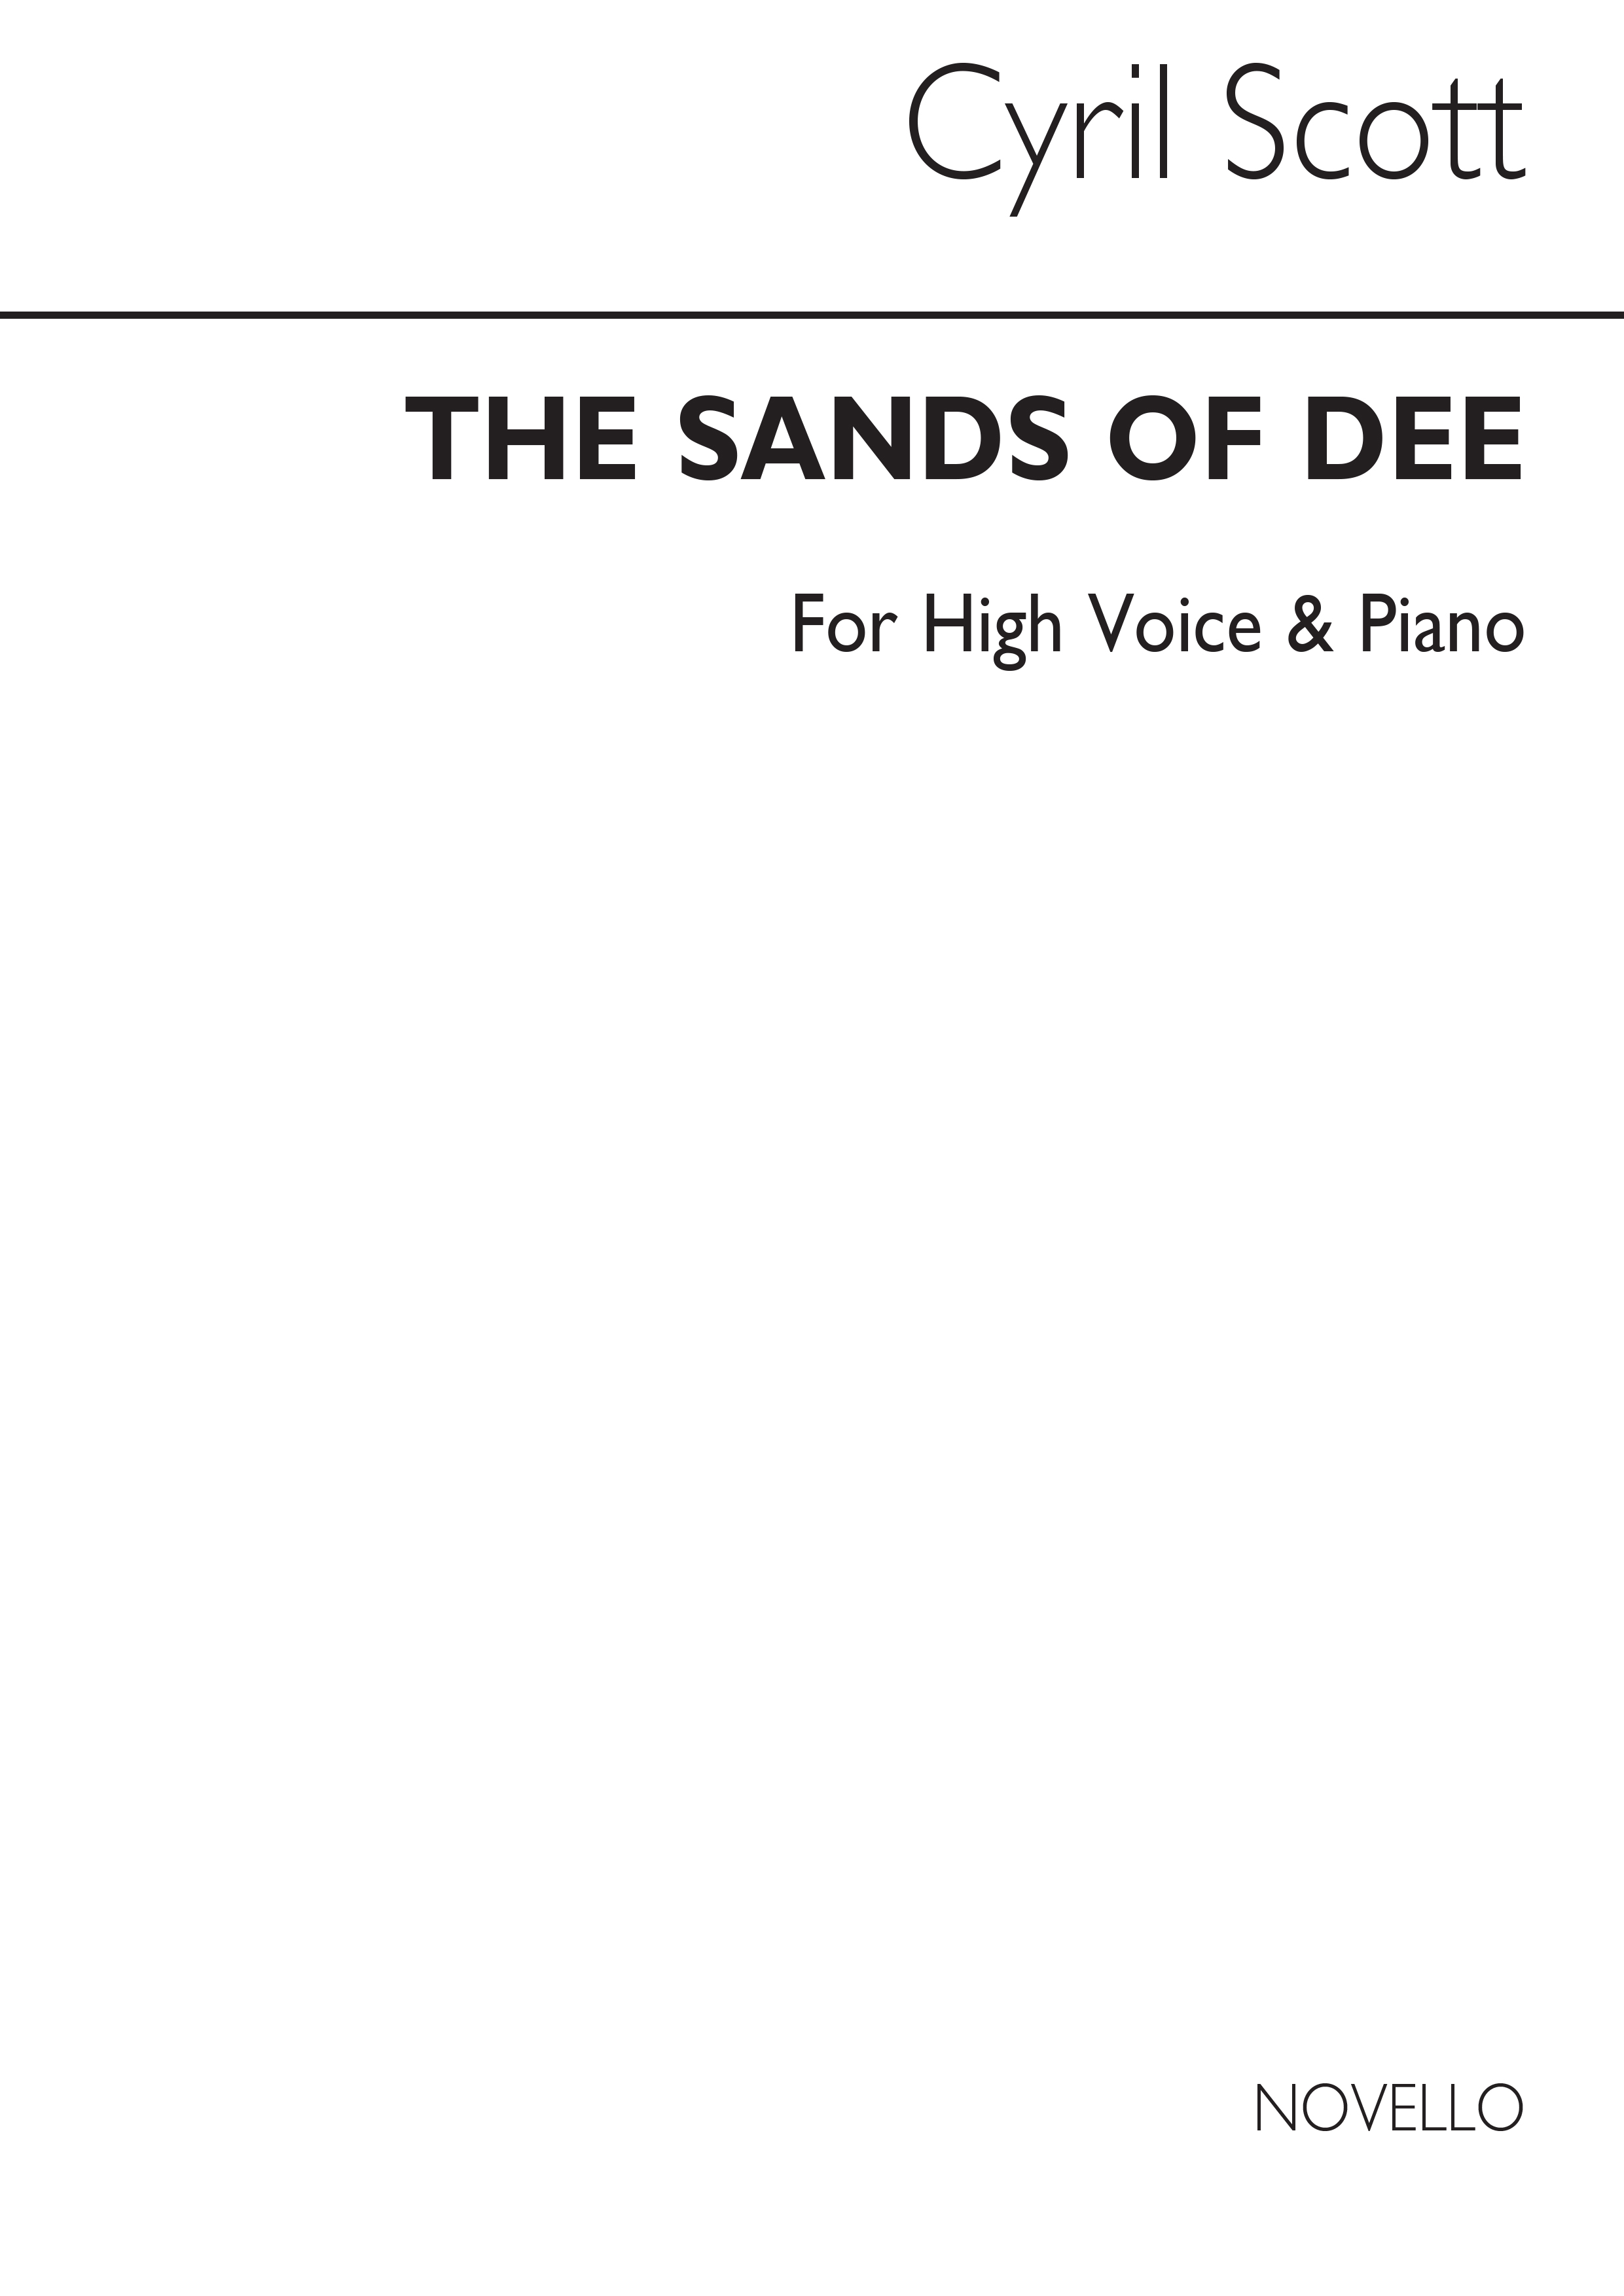 Cyril Scott: The Sands Of Dee-high Voice/Piano (Key-e Flat): High Voice: Vocal